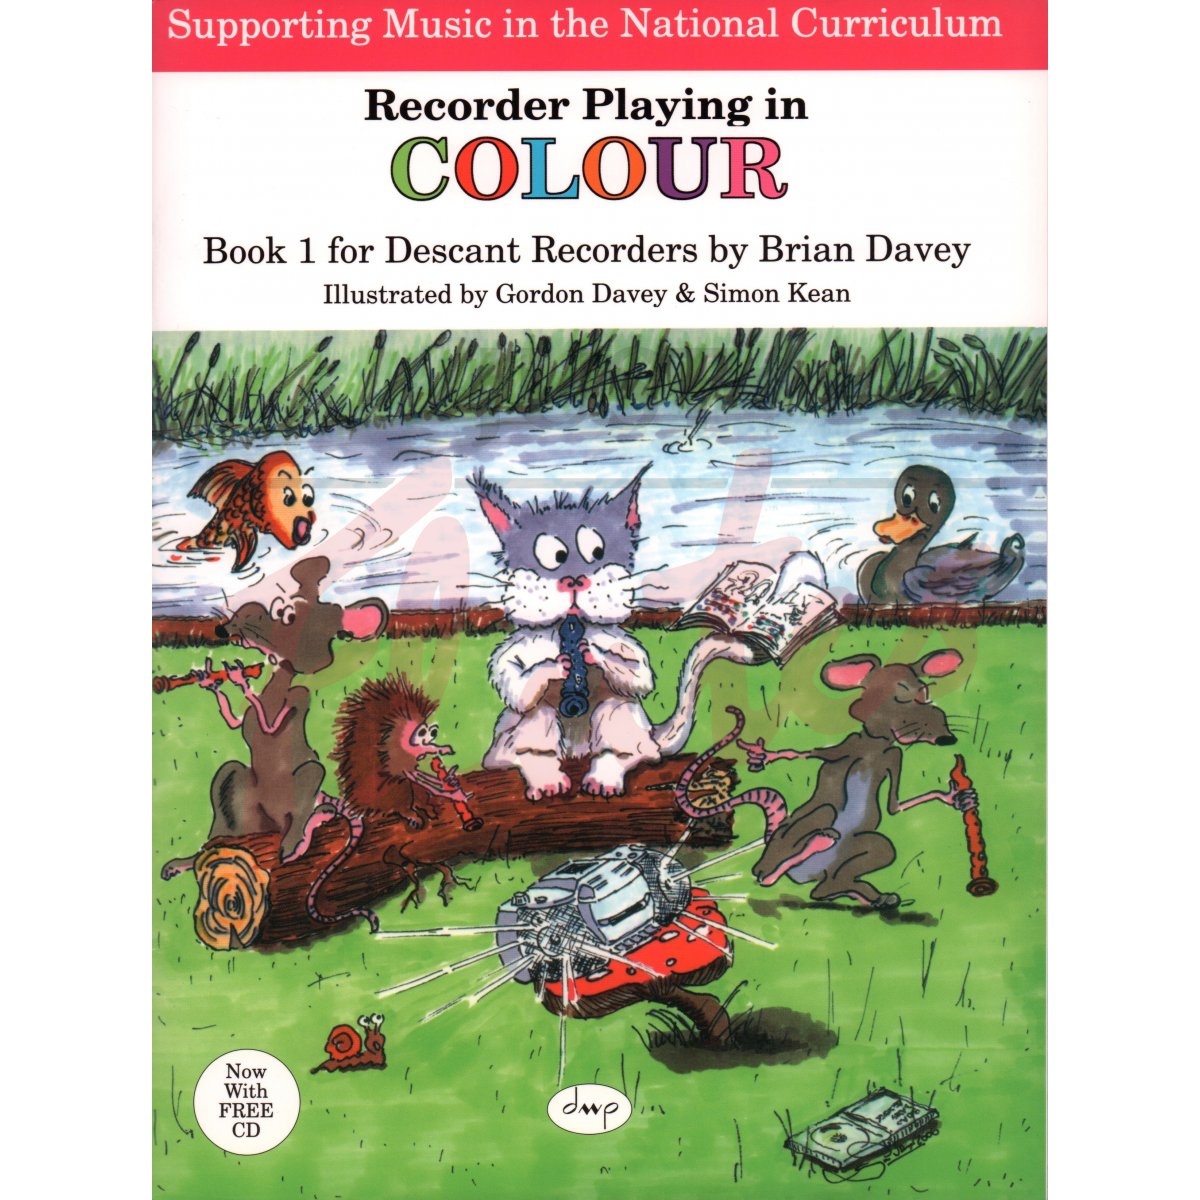 Recorder Playing In Colour Book 1 for Descant Recorders